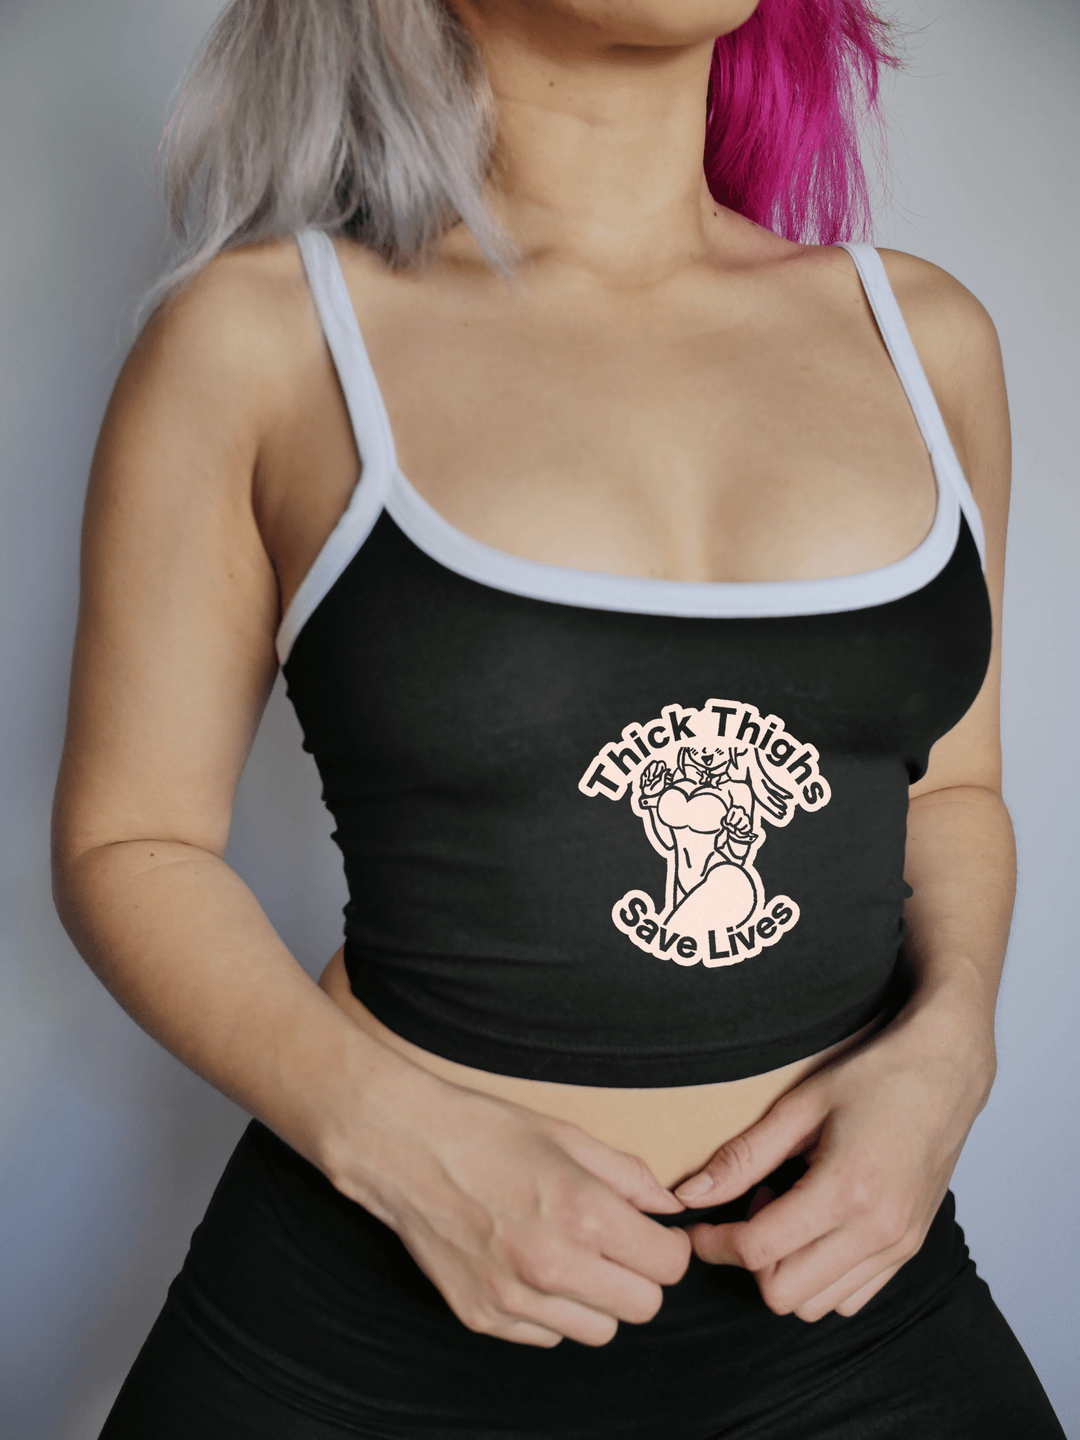 PixelThat Punderwear Cami Crop Top Thick Thighs Saves Lives Cami Crop Top